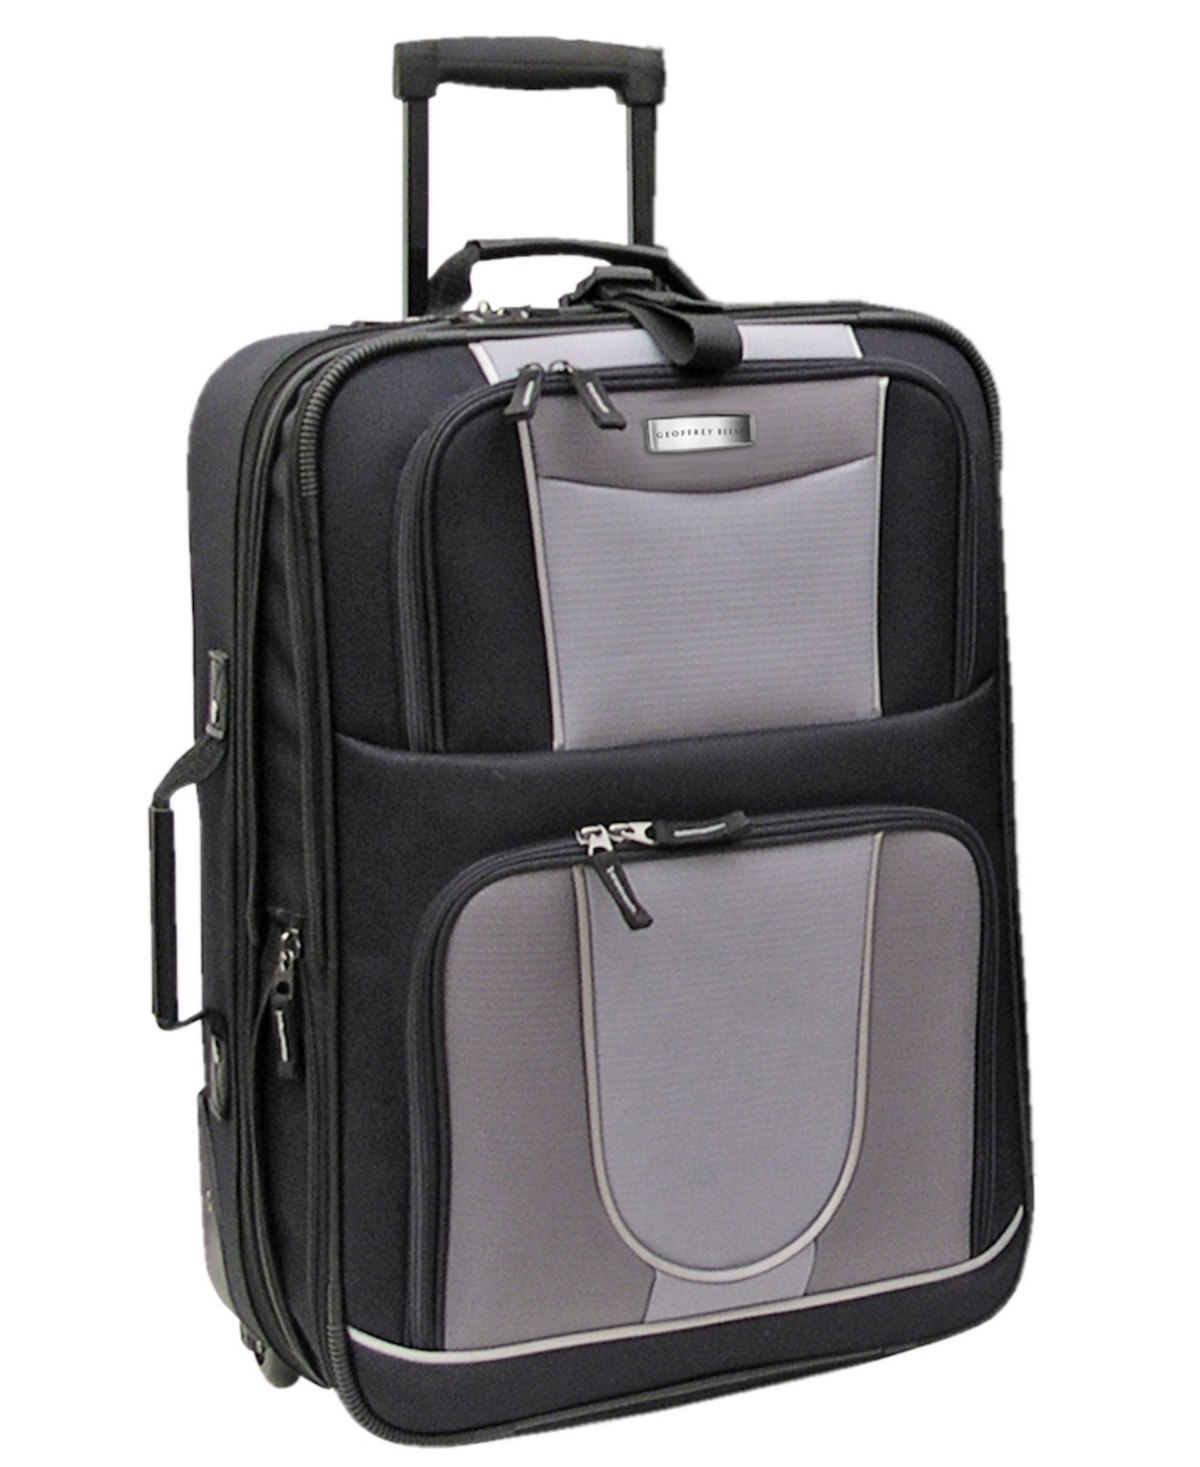 21" Carry-On Luggage - Heather Gr